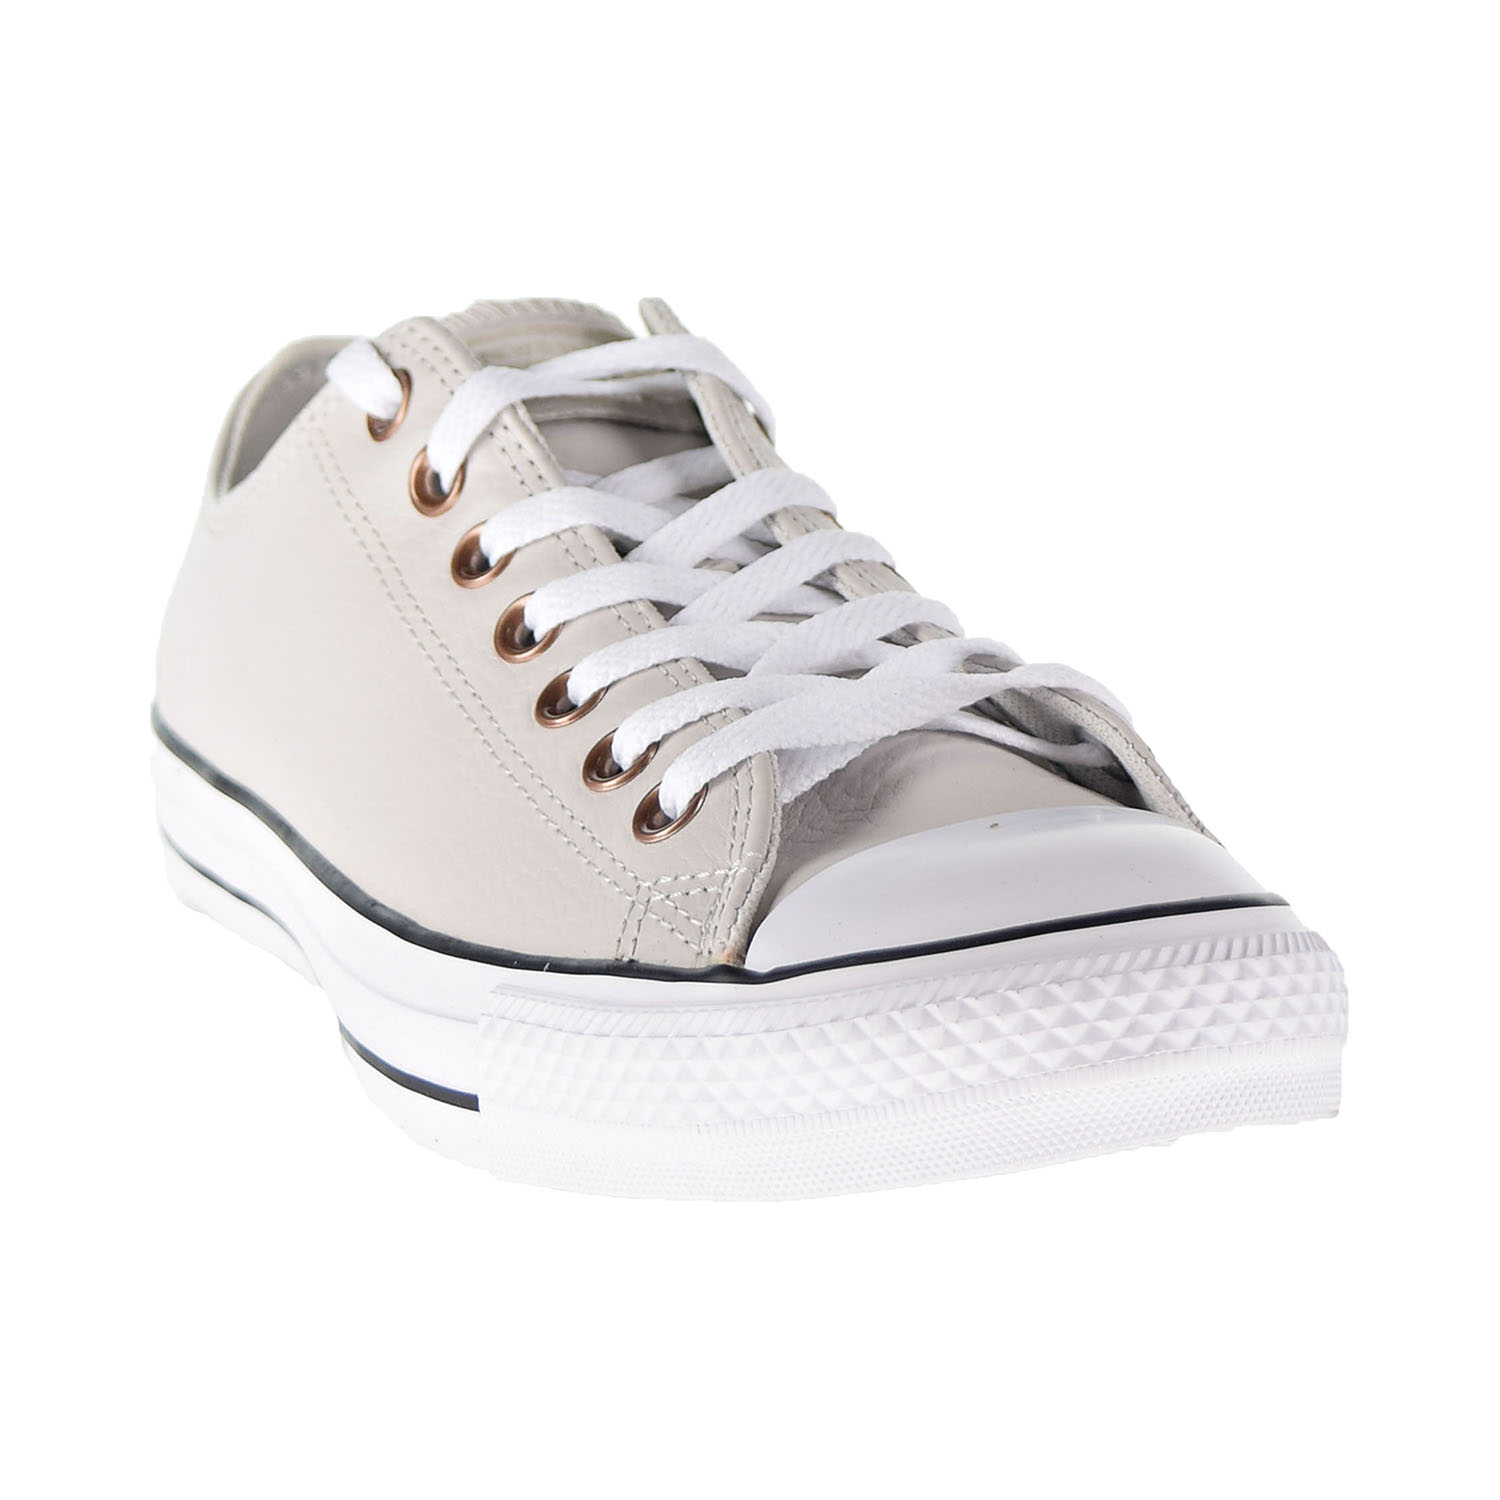 Converse Chuck Taylor All Star Ox Men's Shoes Pale Putty-White-Black 165194c - image 2 of 6